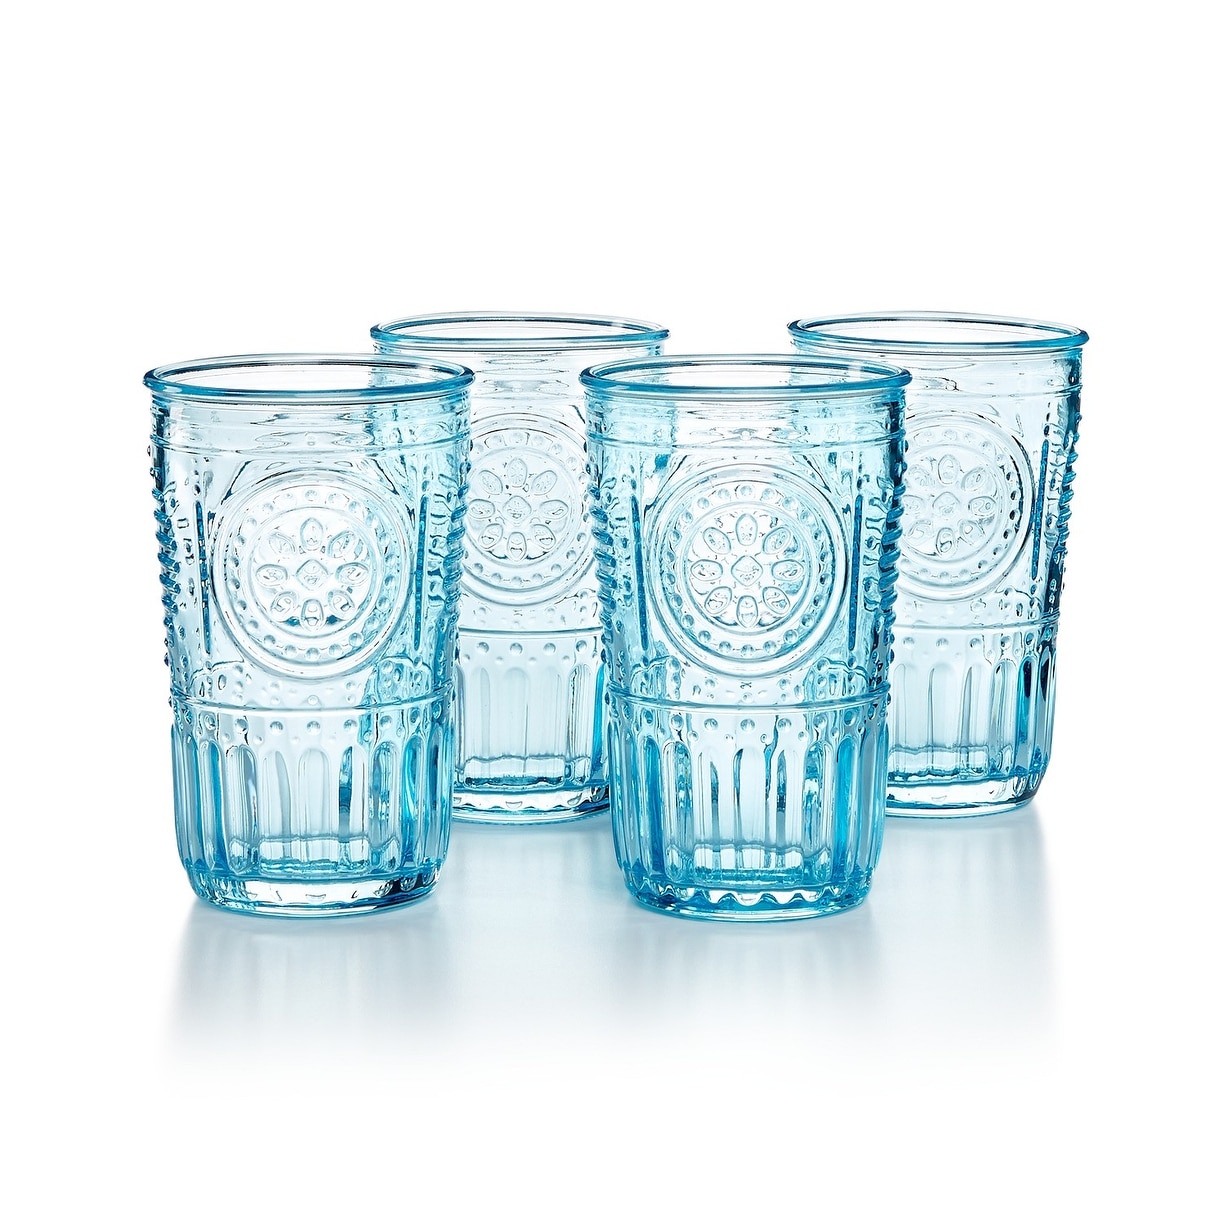 https://ak1.ostkcdn.com/images/products/is/images/direct/d50cda9e088faba34066880a51bd50bbeadbe401/Bormioli-Rocco-Romantic-Glass-Drinking-Tumbler-Victorian-Inspired-Set-Of-4.jpg